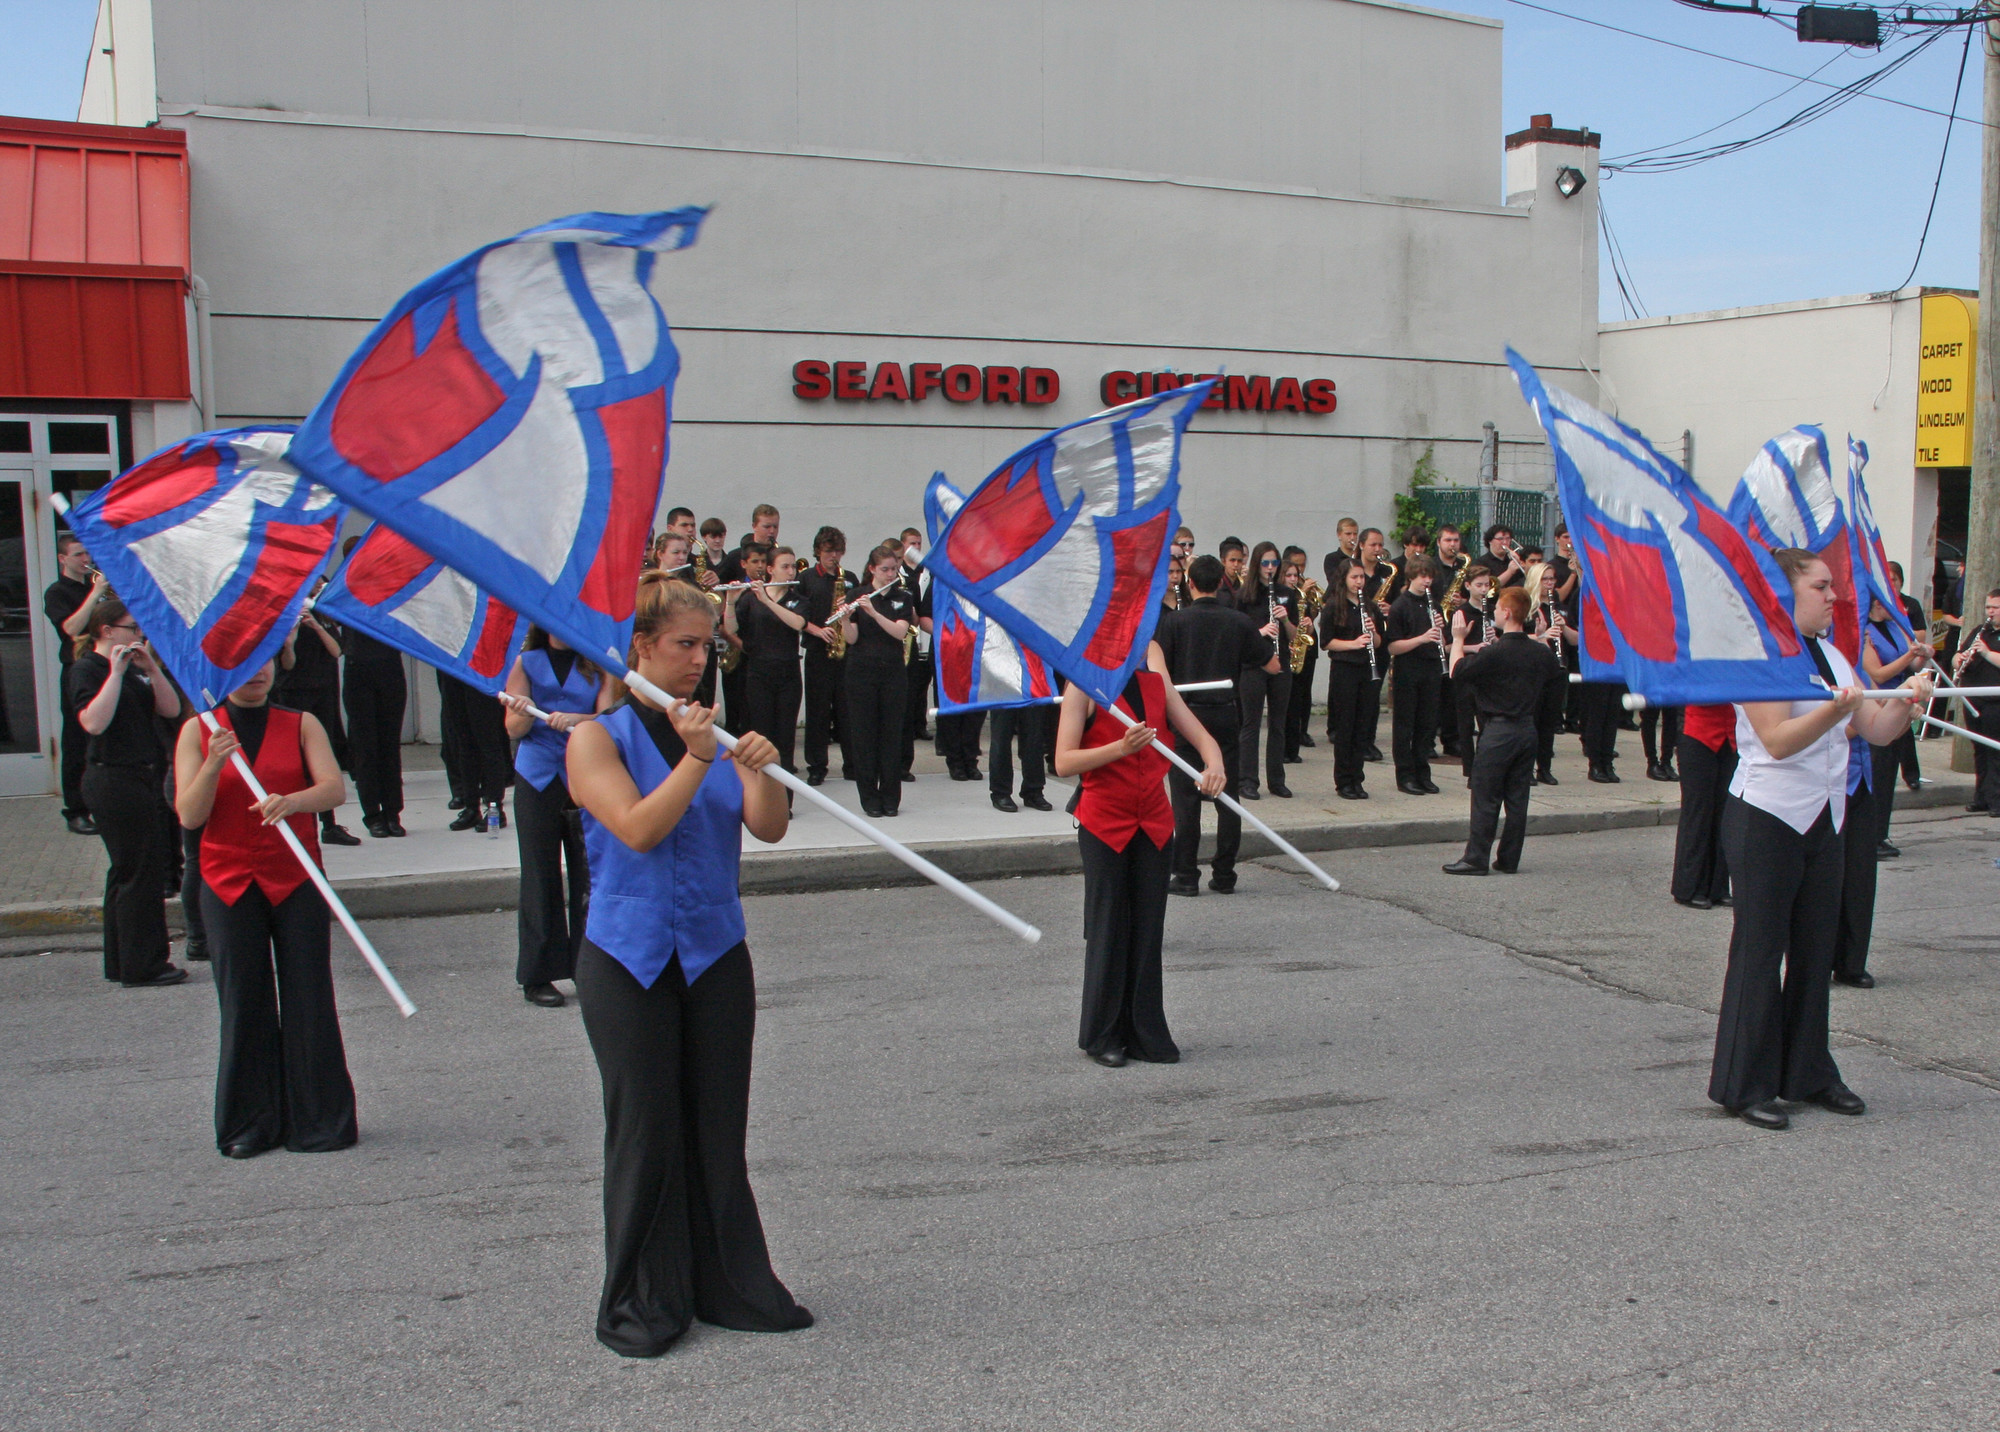 The Seaford High School Marching Band's color guard performs in the parade.